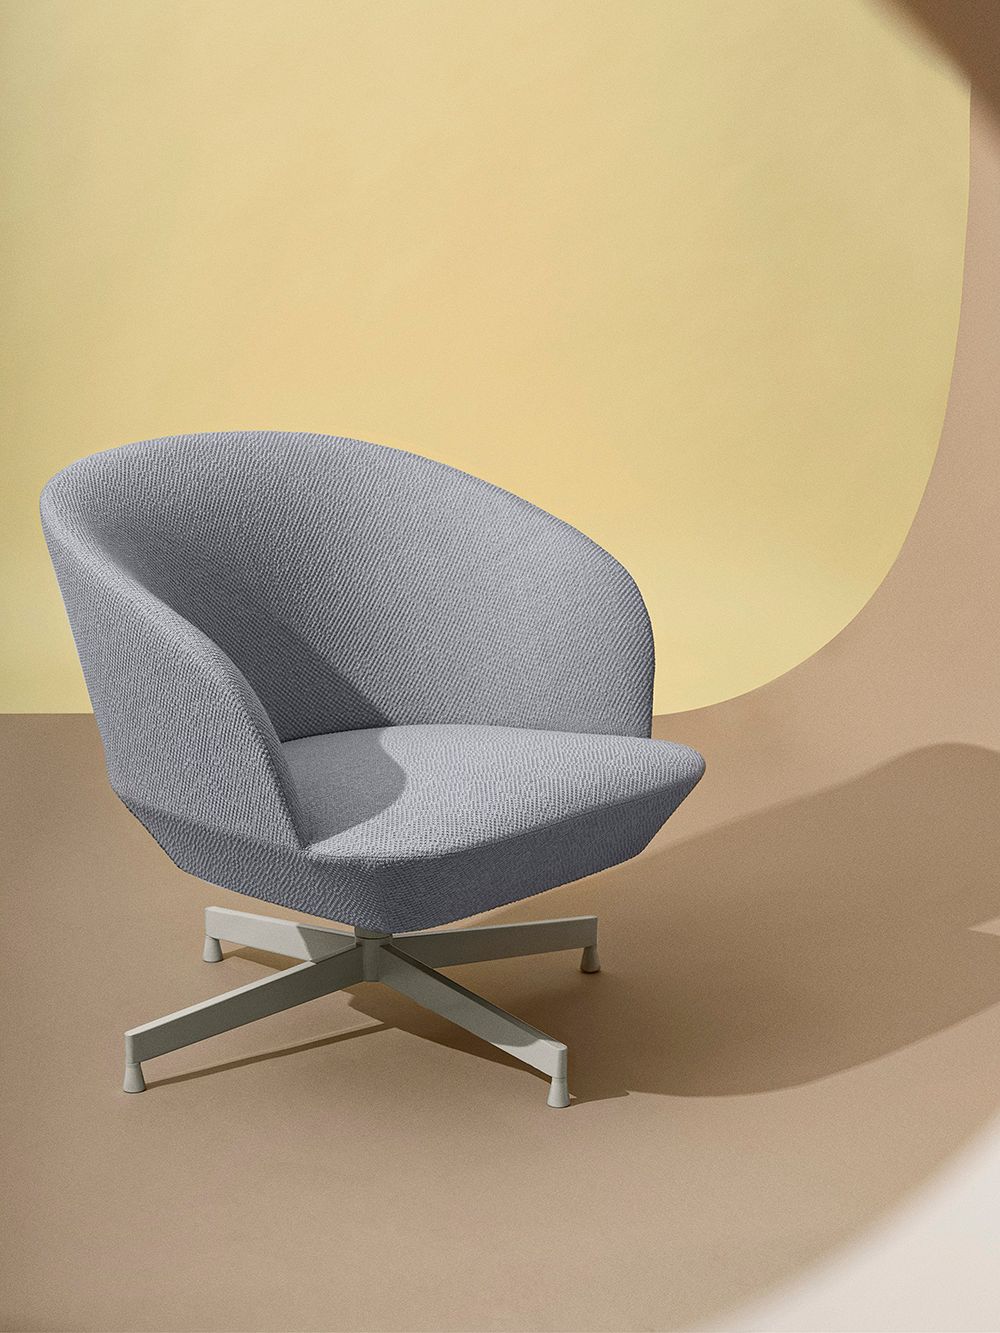 An image of Muuto's Oslo lounge chair with a swiveling base.